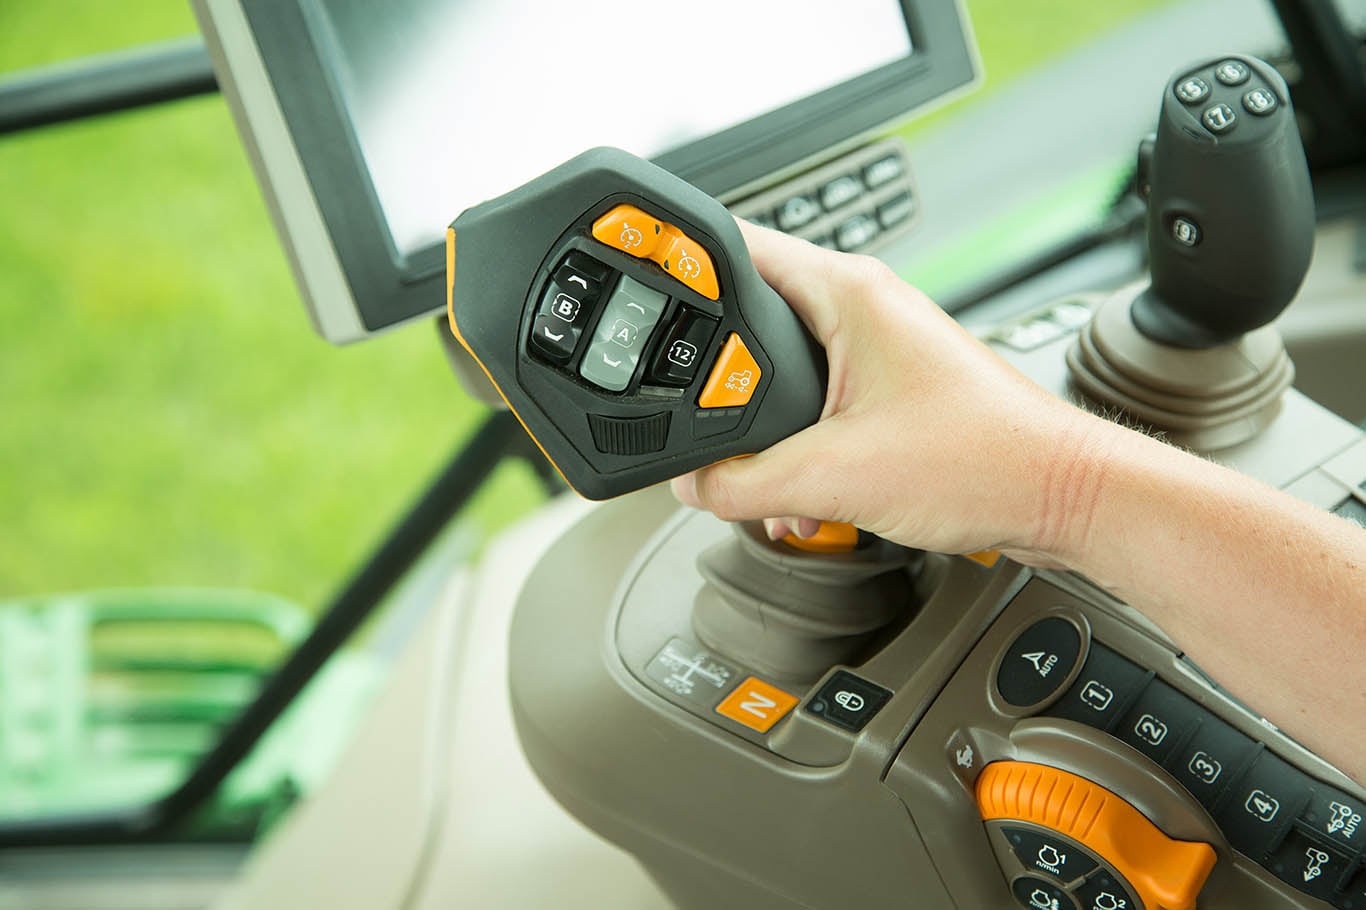 CommandPro is a customisable, ergonomic joystick that can control tractor speed, acceleration and implement functions.